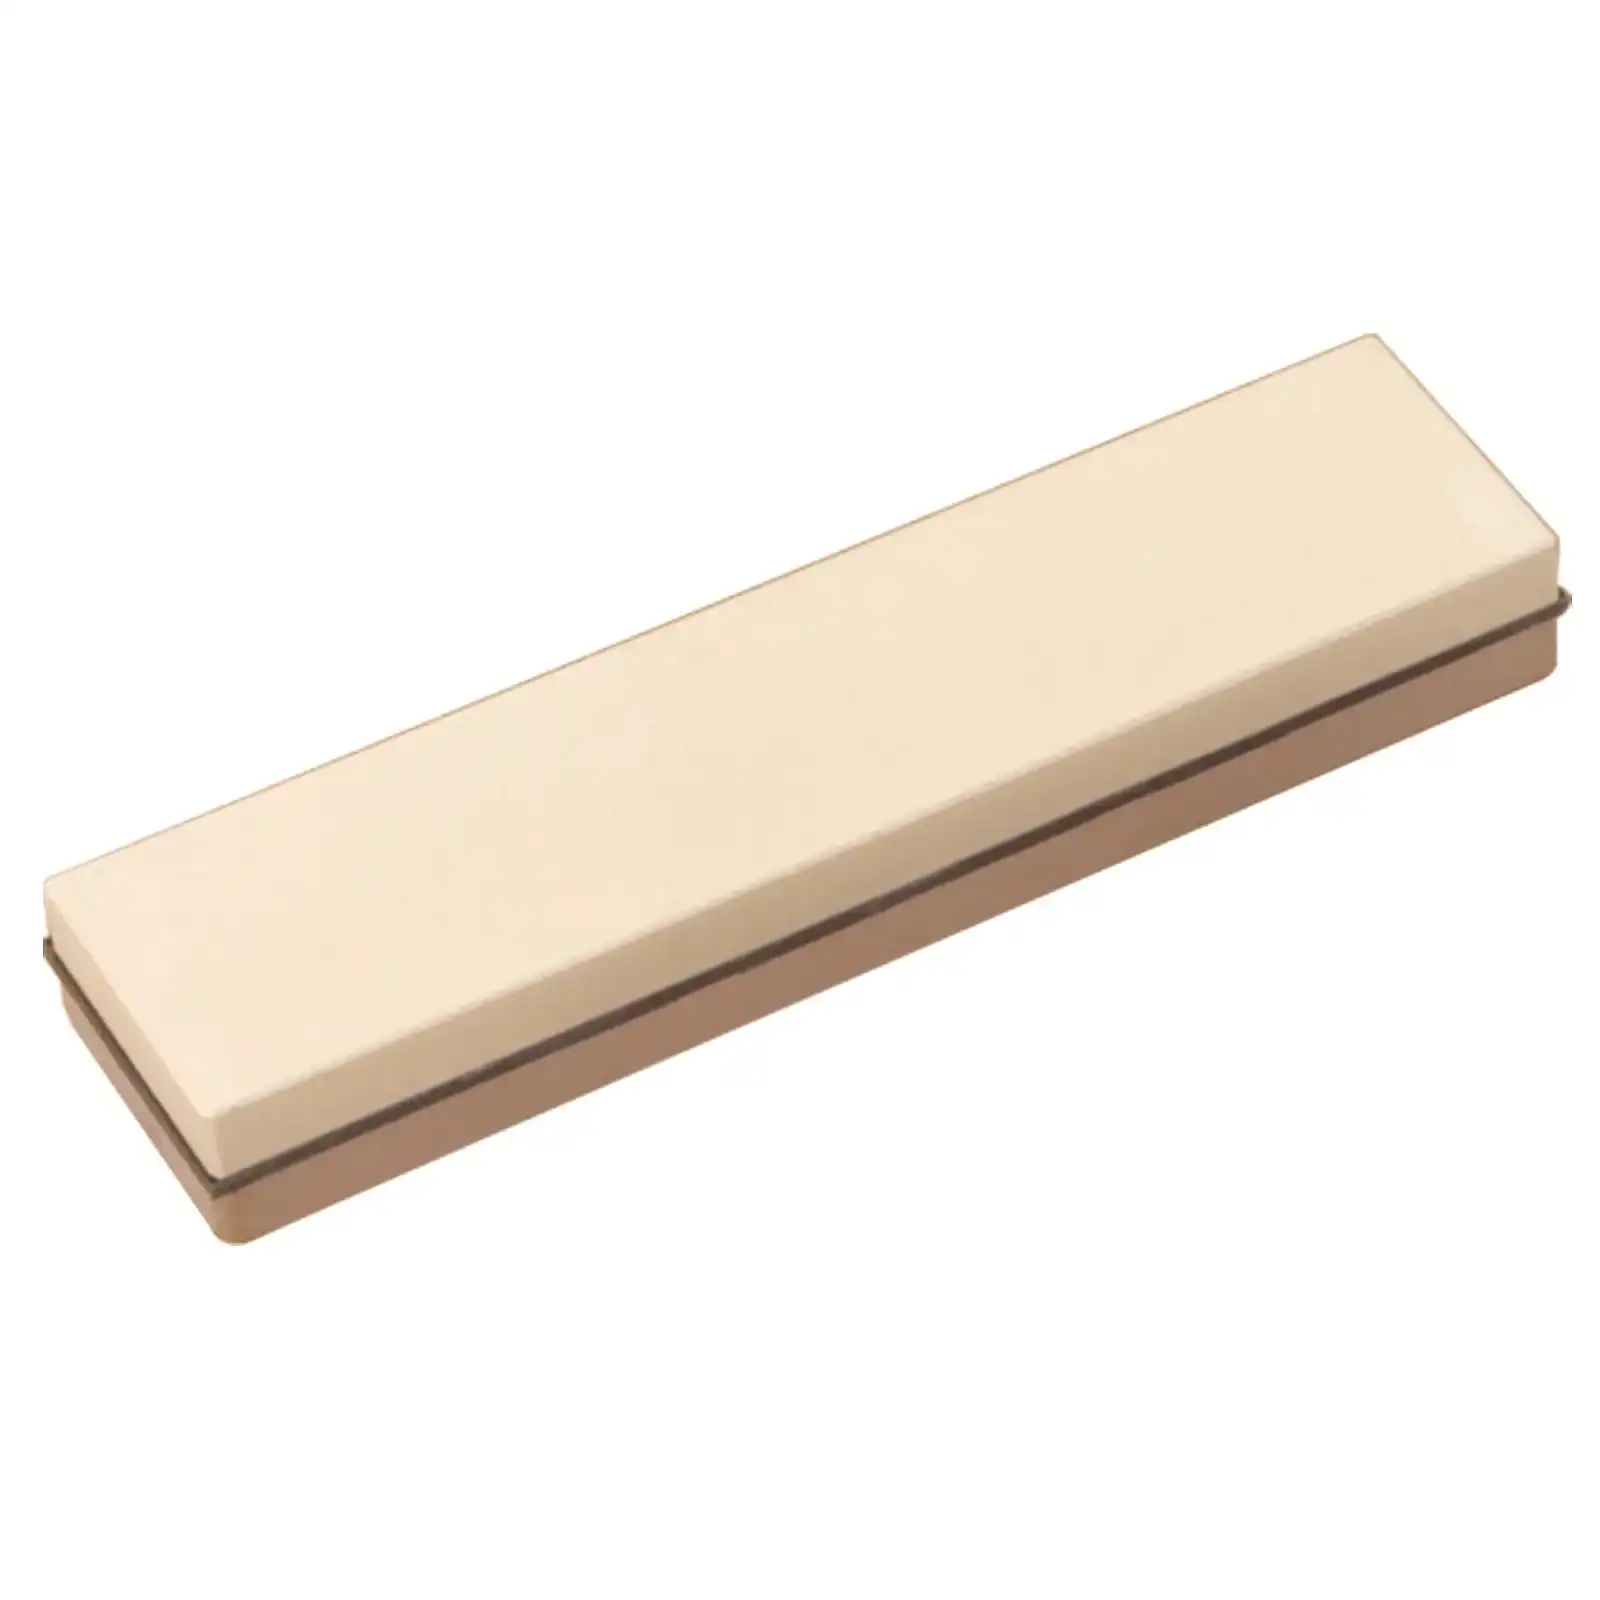 \\$10 Off - King® Combination Waterstone - 8" x 2" x 1" - 1000/6000 Grit